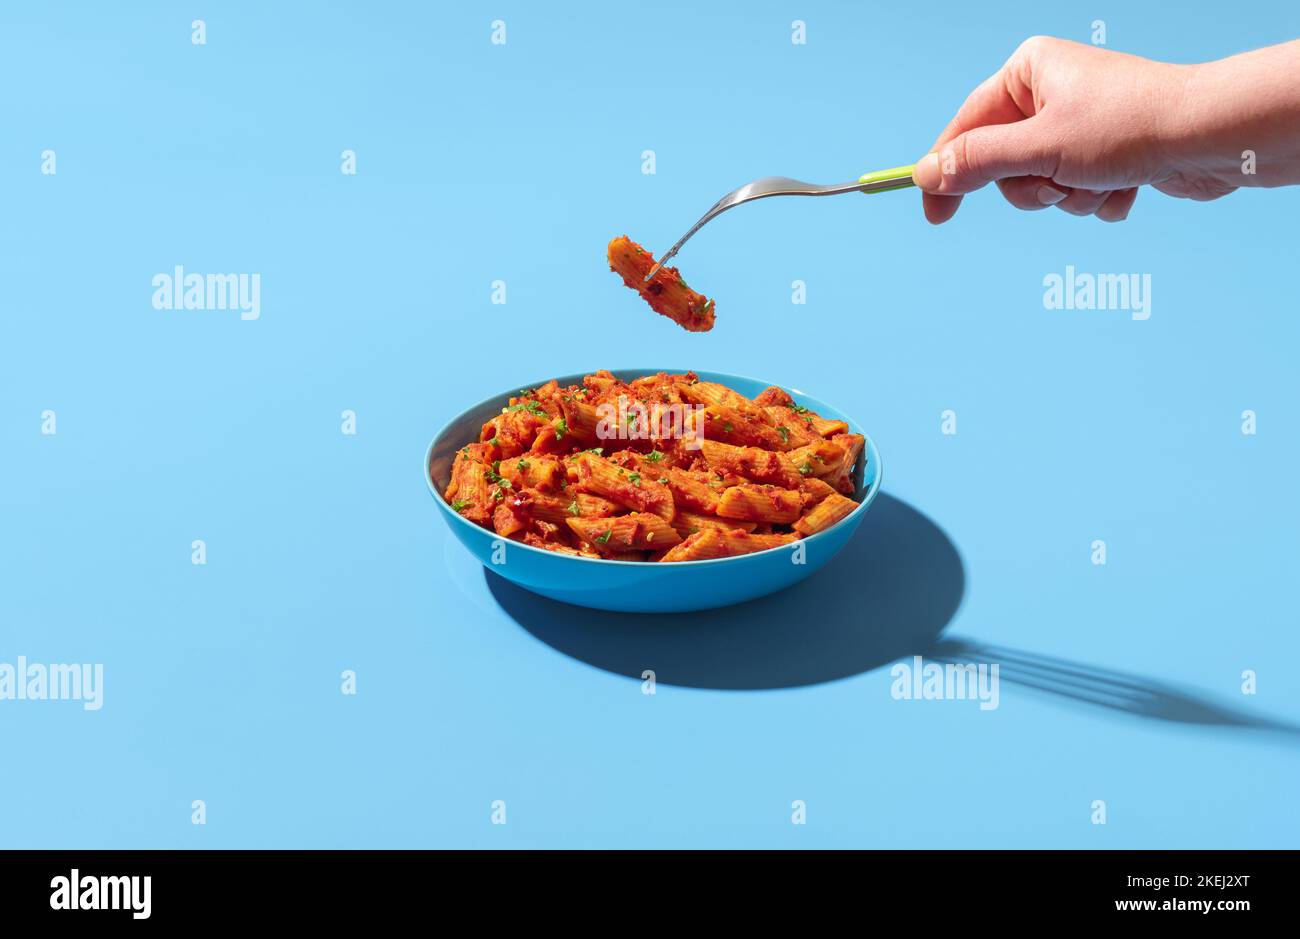 Woman's hand taking a pasta tube from a bowl with a fork. Eating pasta penne alla arrabbiata. Spicy pasta dish in a blue bowl minimalist on a colorful Stock Photo